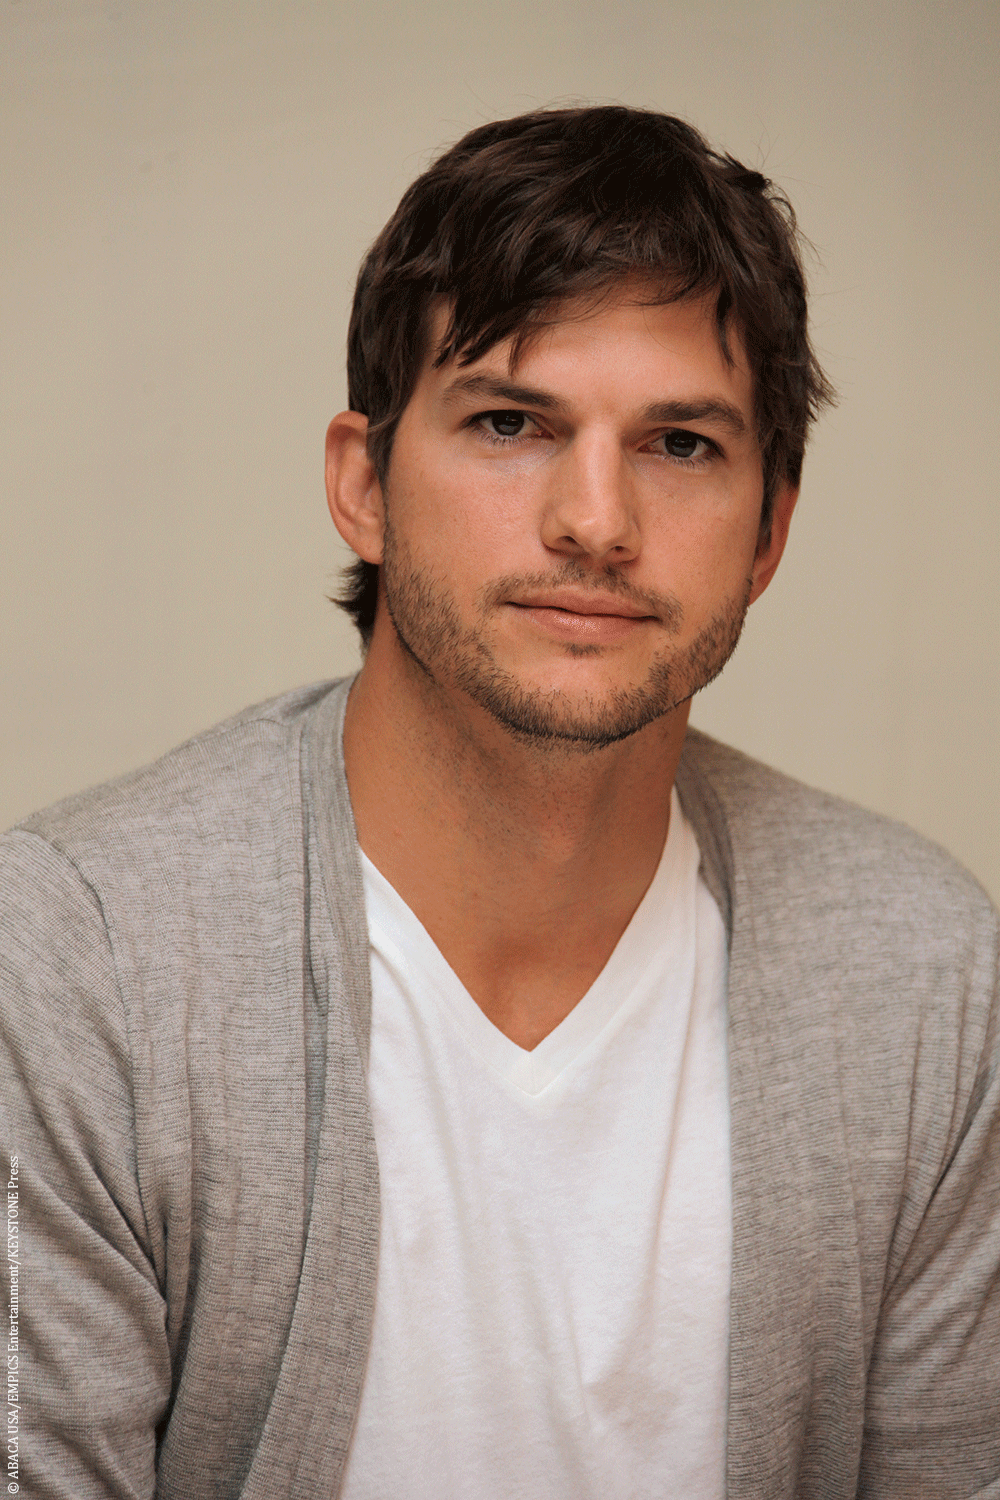 Ashton Kutcher made $750,000 an episode for his role on Two and a Half Men. Ashton replaced Charlie Sheen as the highest paid actor when he joined the series. At one point while on Two and a Half Men, Charlie was rumored to be making $1.25 million per episode. Ashton started filming the show in […]